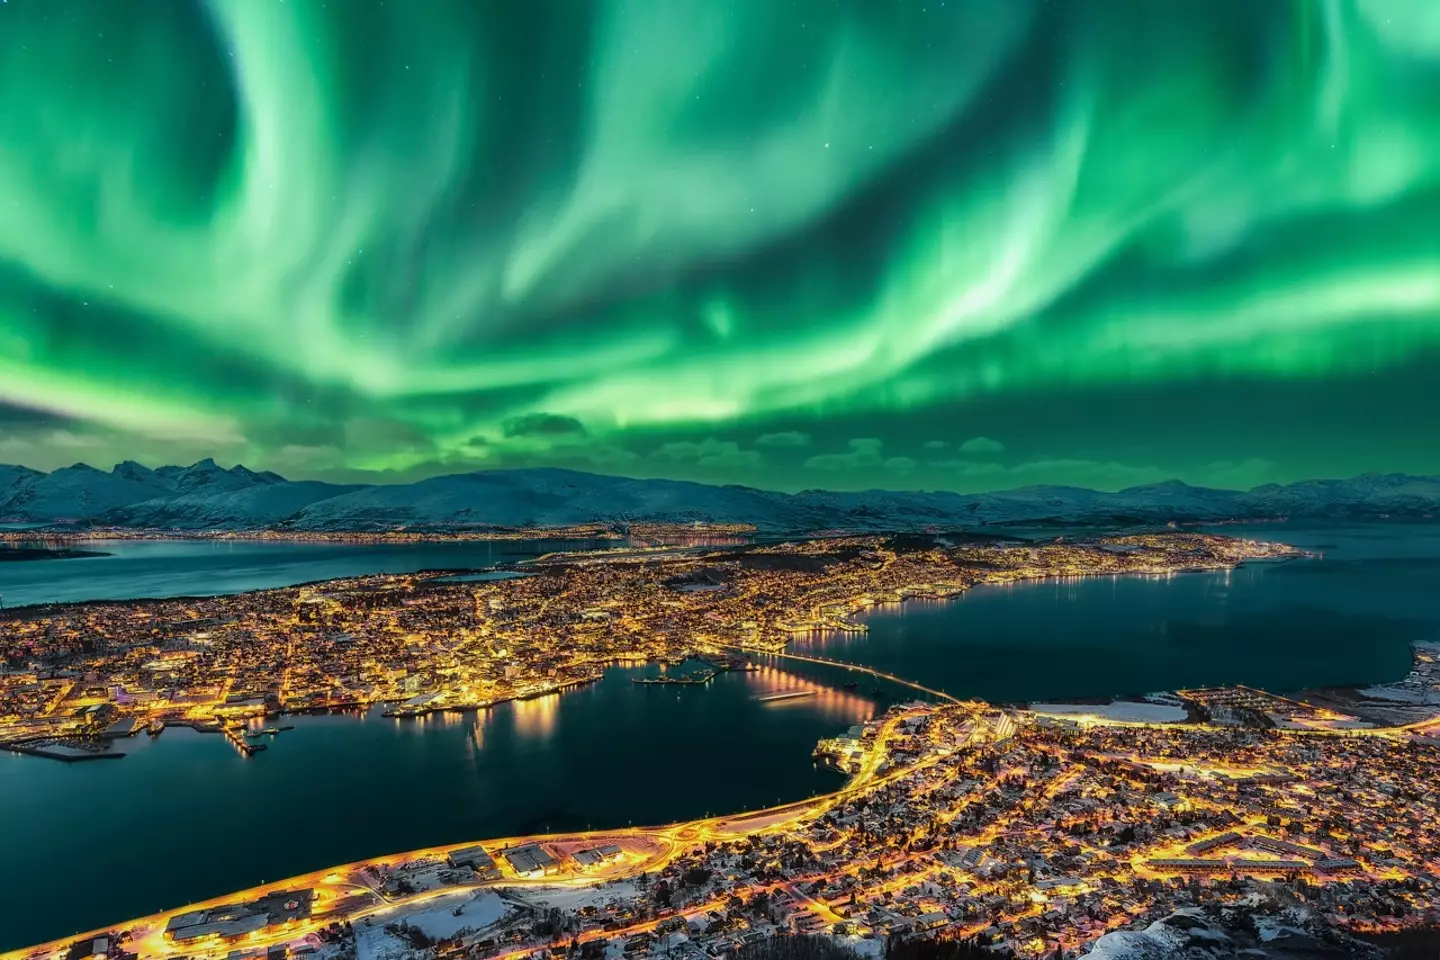 The Northern Lights are a spectacle of nature that continues to fascinate millions around the world.